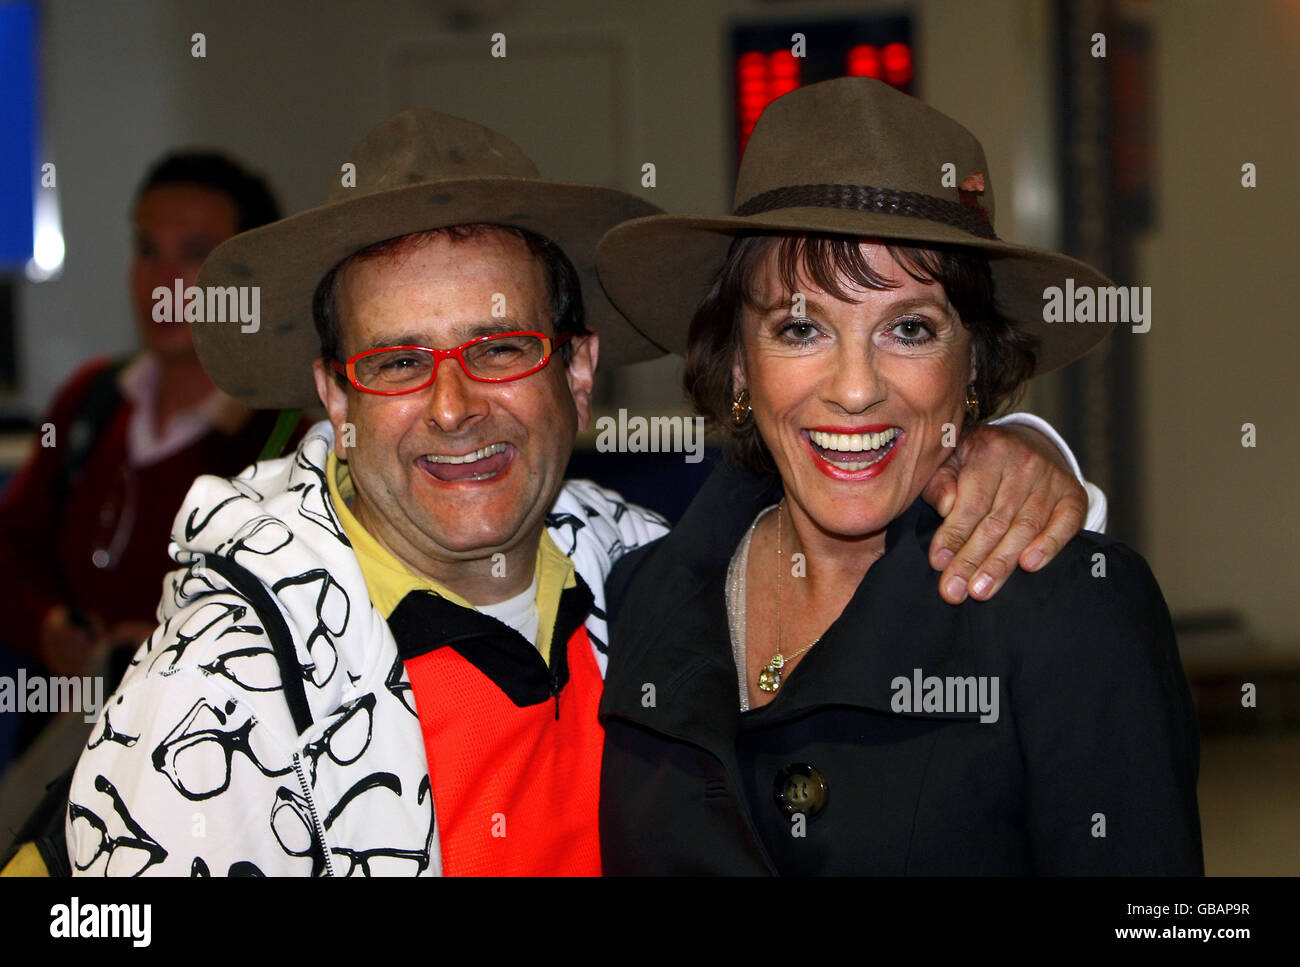 I'm a Celebrity... Get Me Out Of Here contestants Timmy Mallet and Esther Rantzen arrive at London's Heathrow Airport on a flight from Australia. Stock Photo